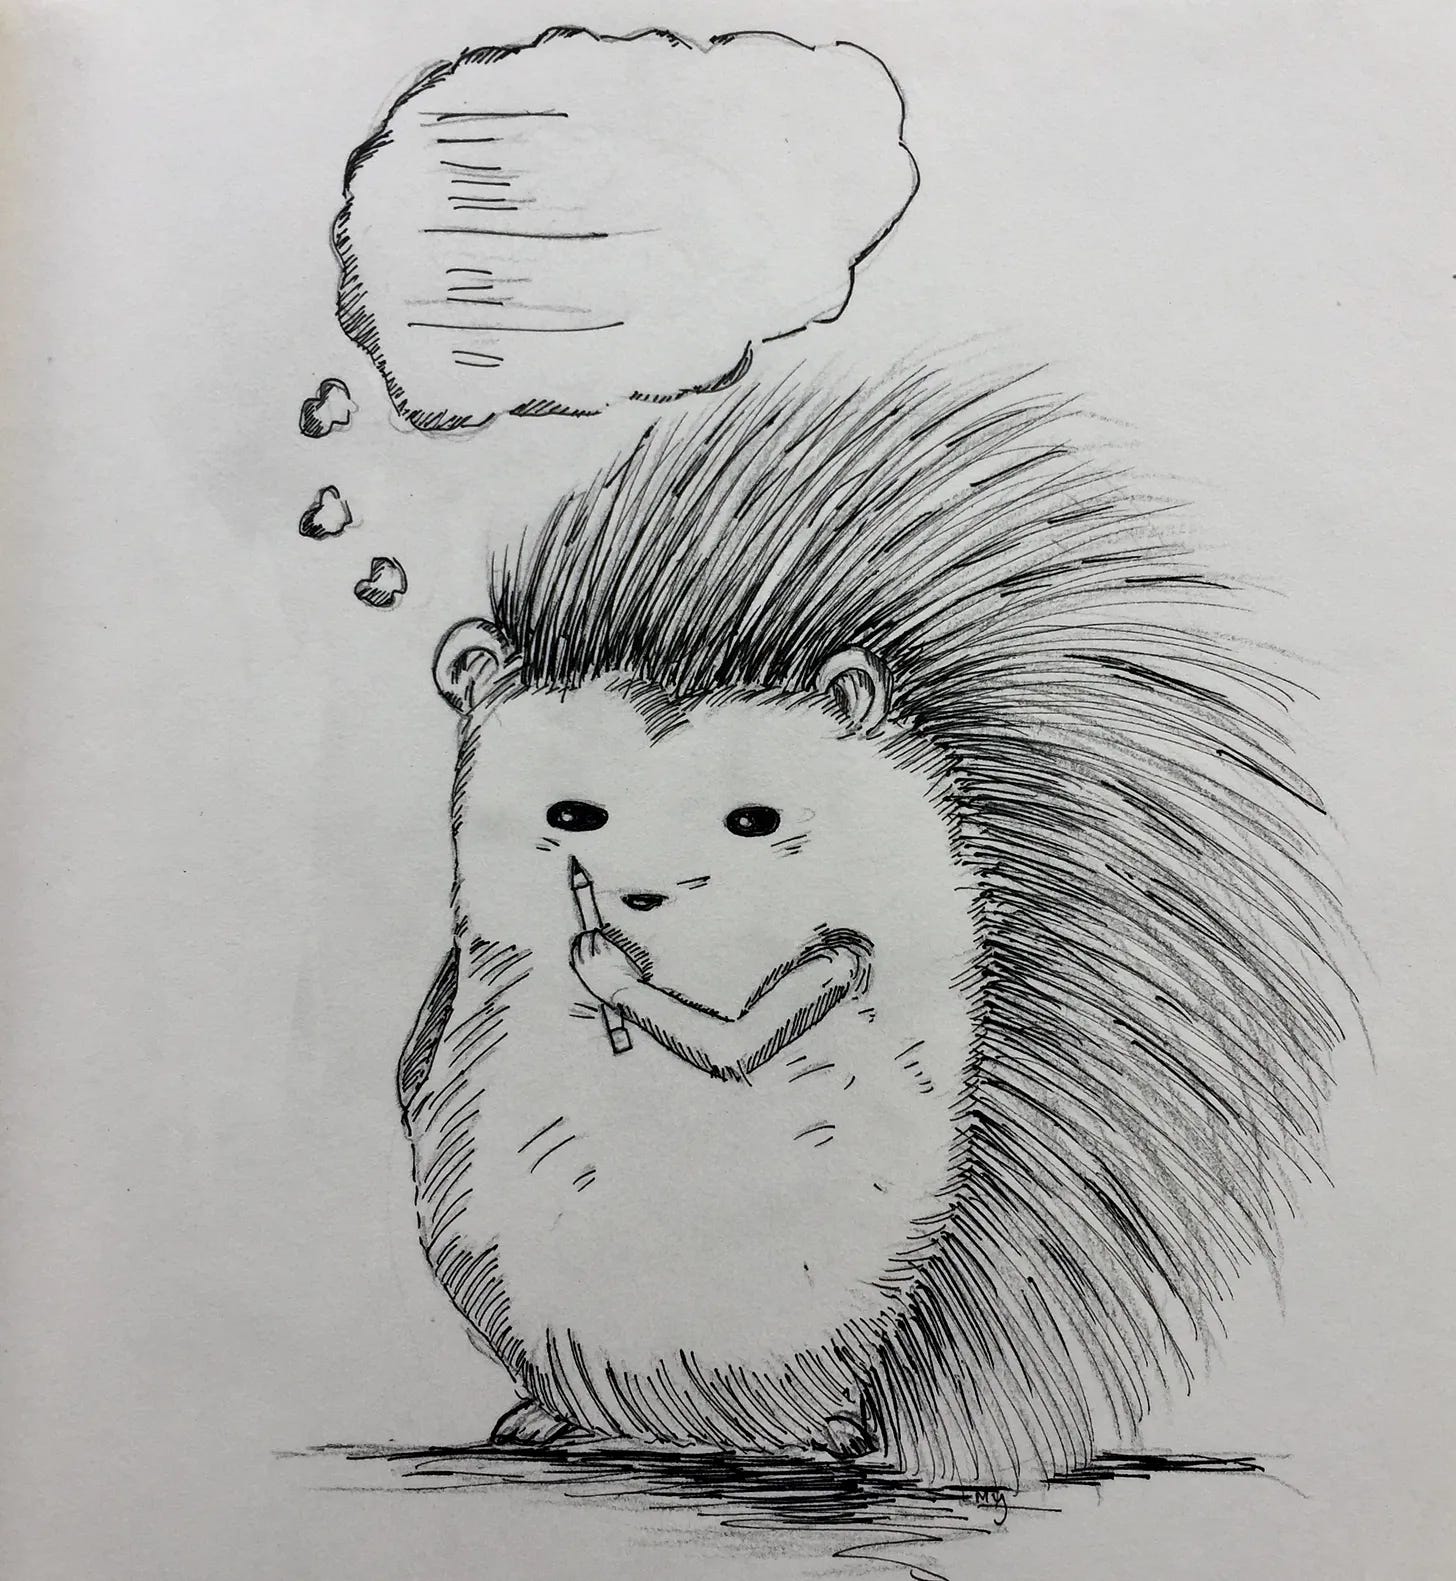 image: line illustration of a comic porcupine holding up a pencil in its fine, with a thought bubble above its head.